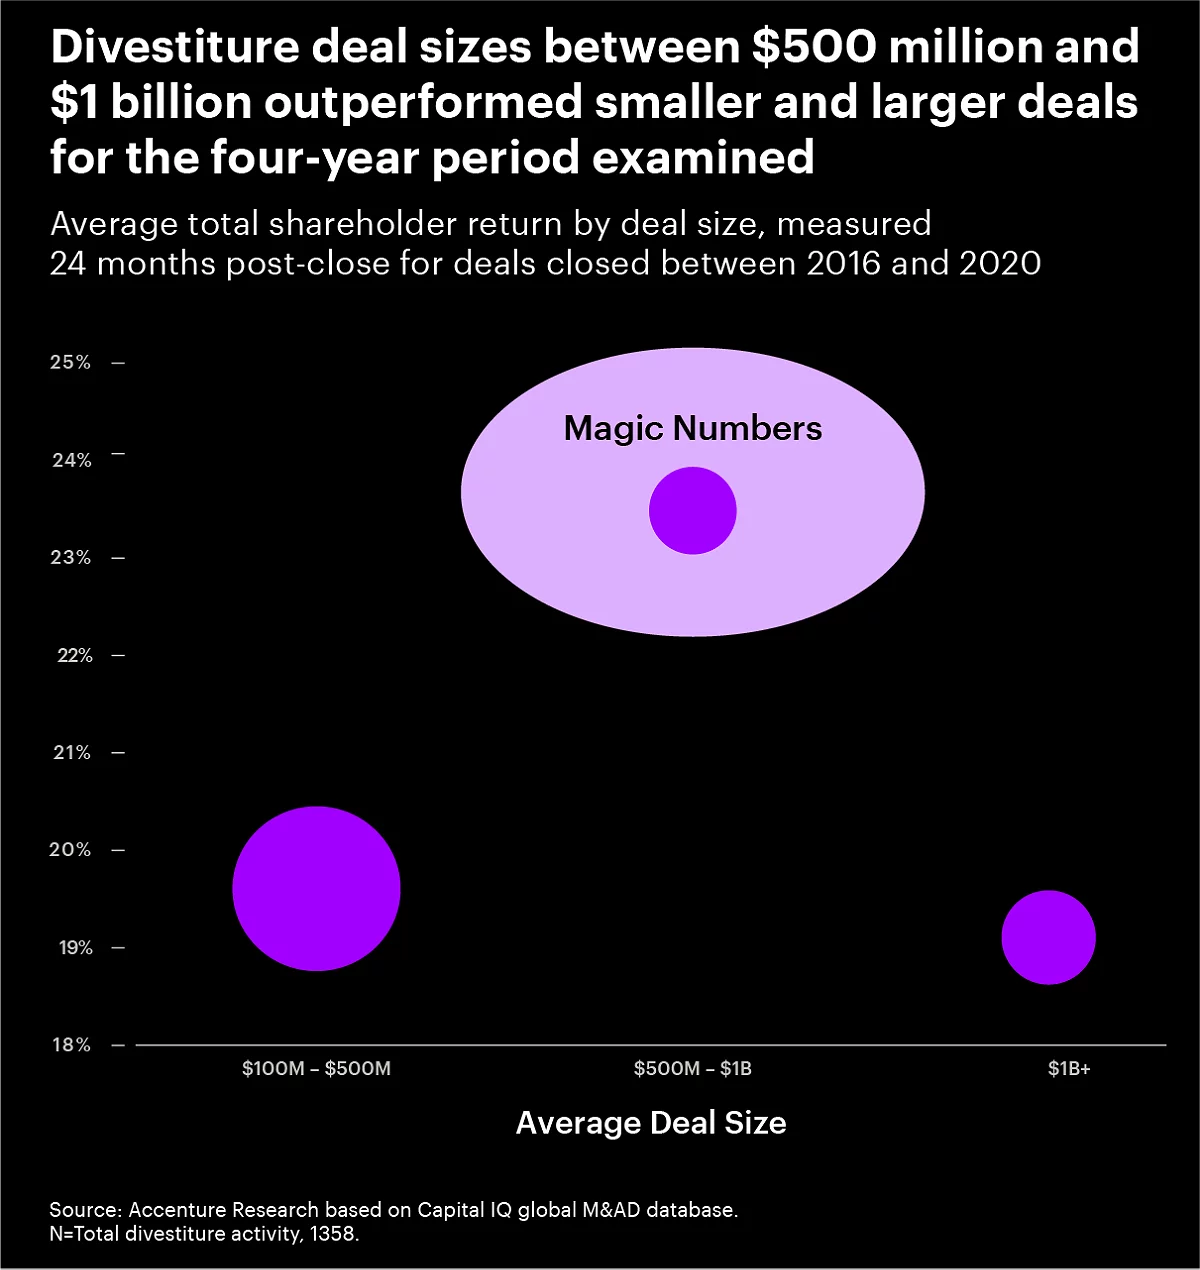 A chart indicating that companies that performed divestiture deals sized between $500 million and $1 billion over the four-year period analyzed experienced greater total shareholder return than smaller or larger deal sizes.